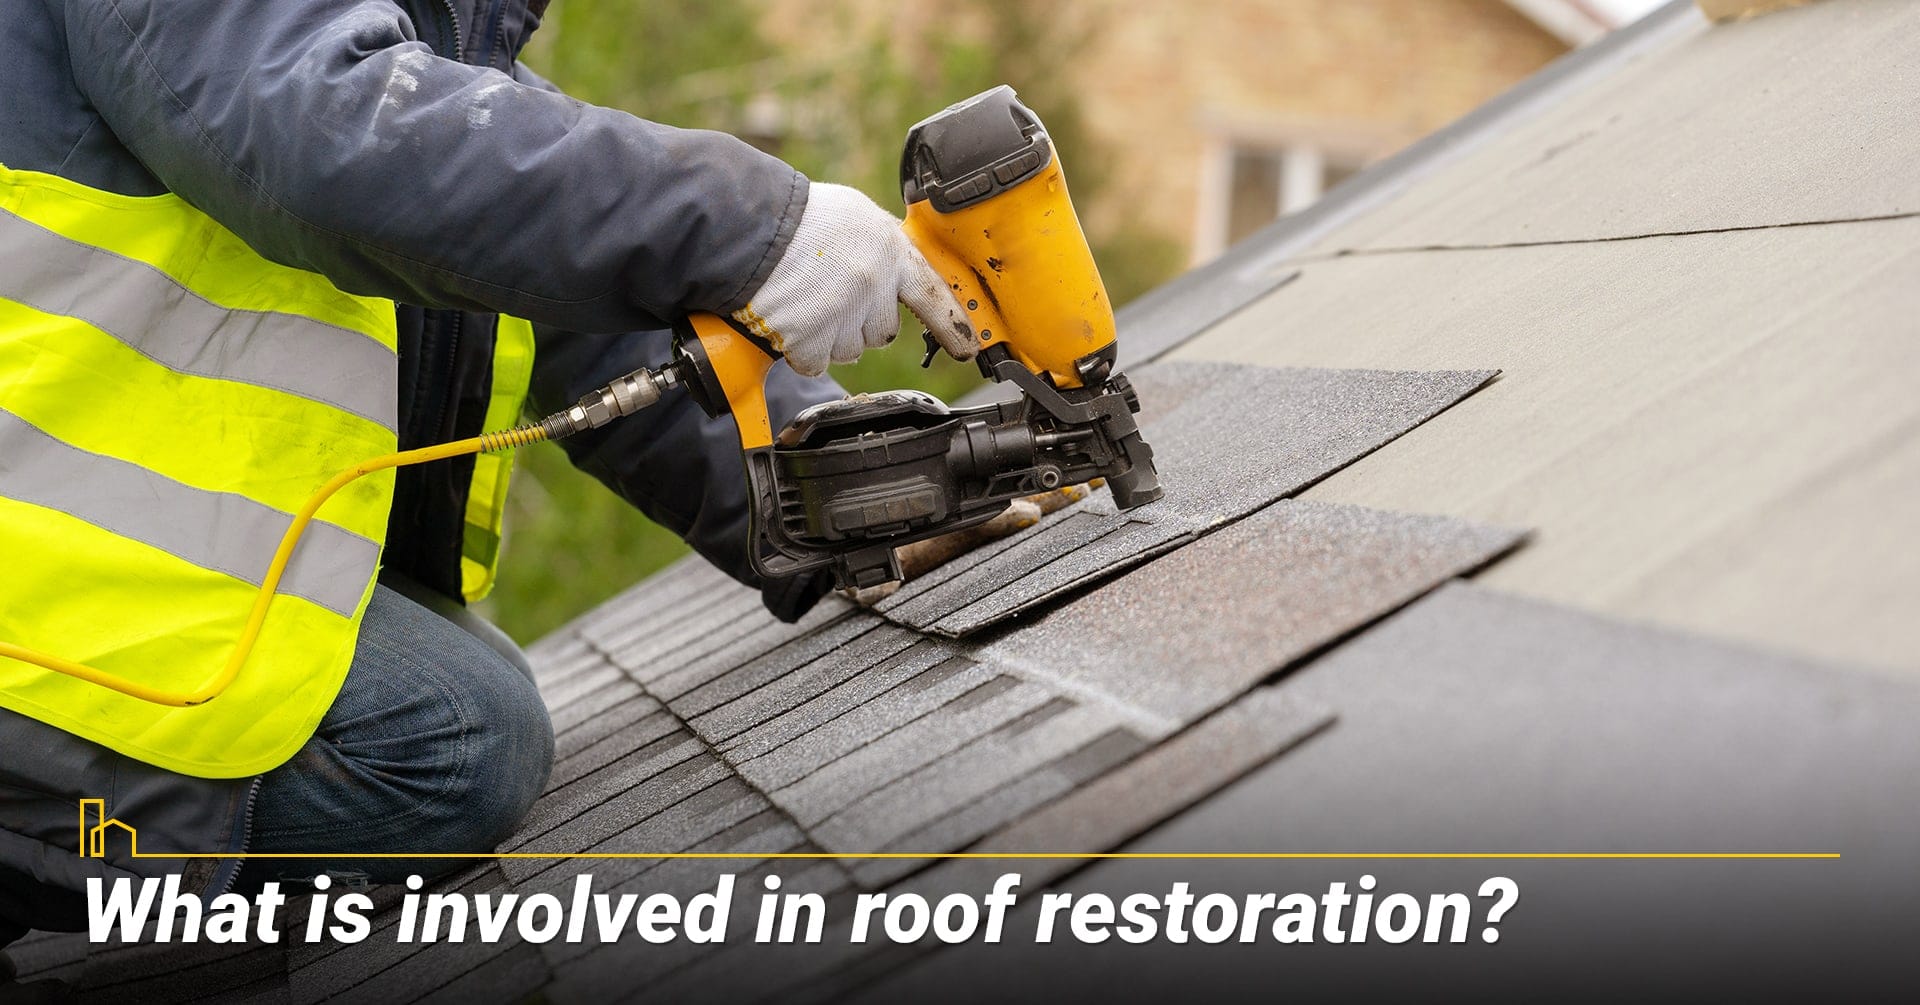 What is involved in roof restoration? steps in roof restoration